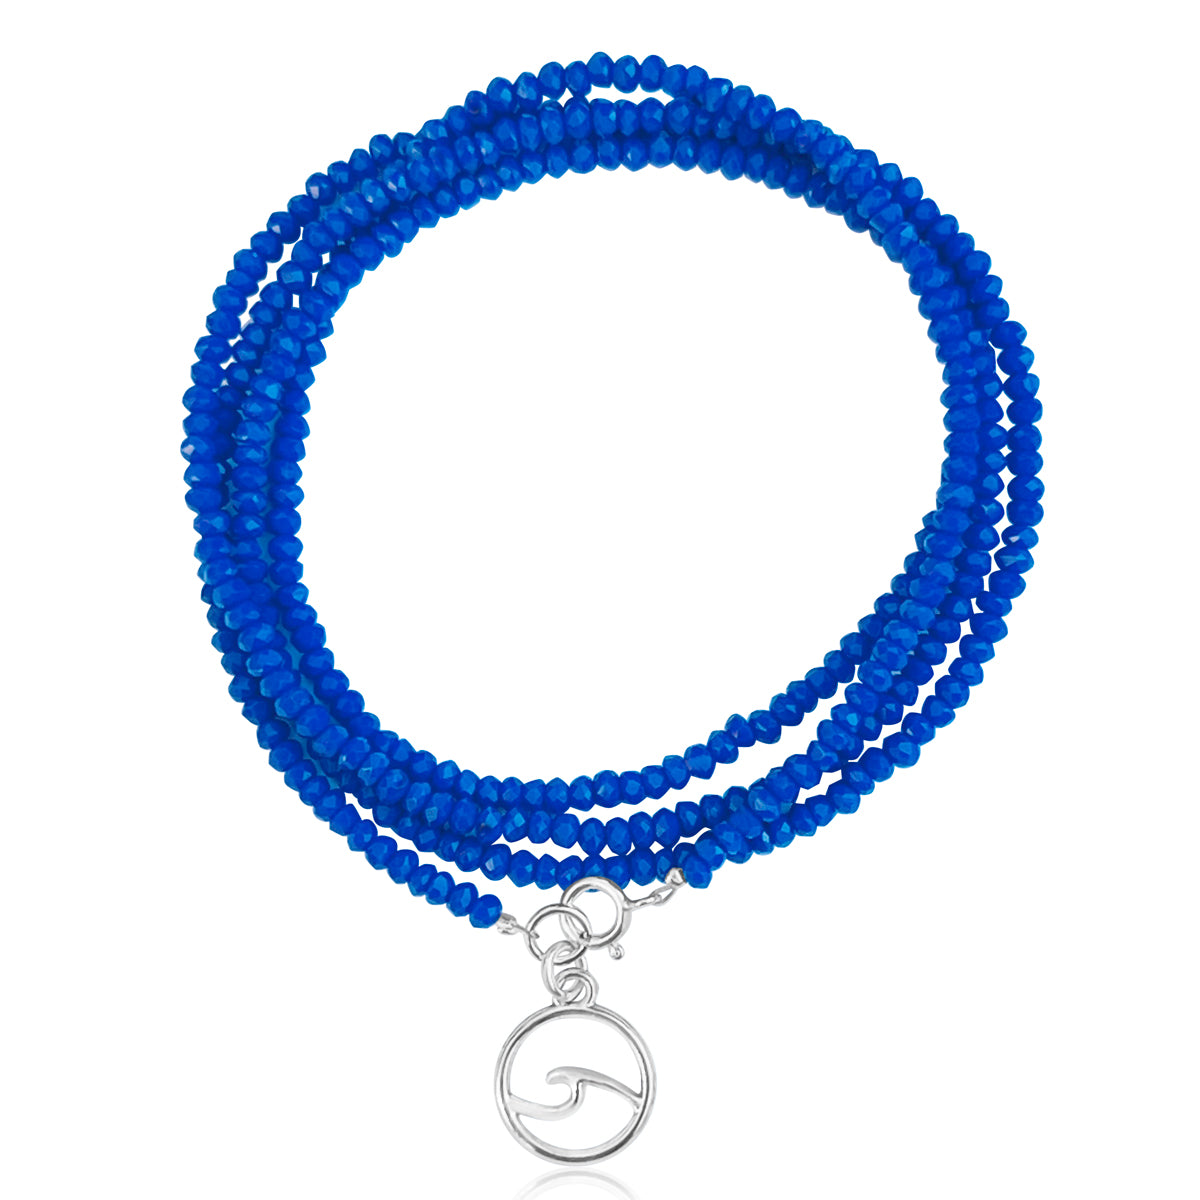 Go with the Flow Wrap Bracelet with Blue Crystals